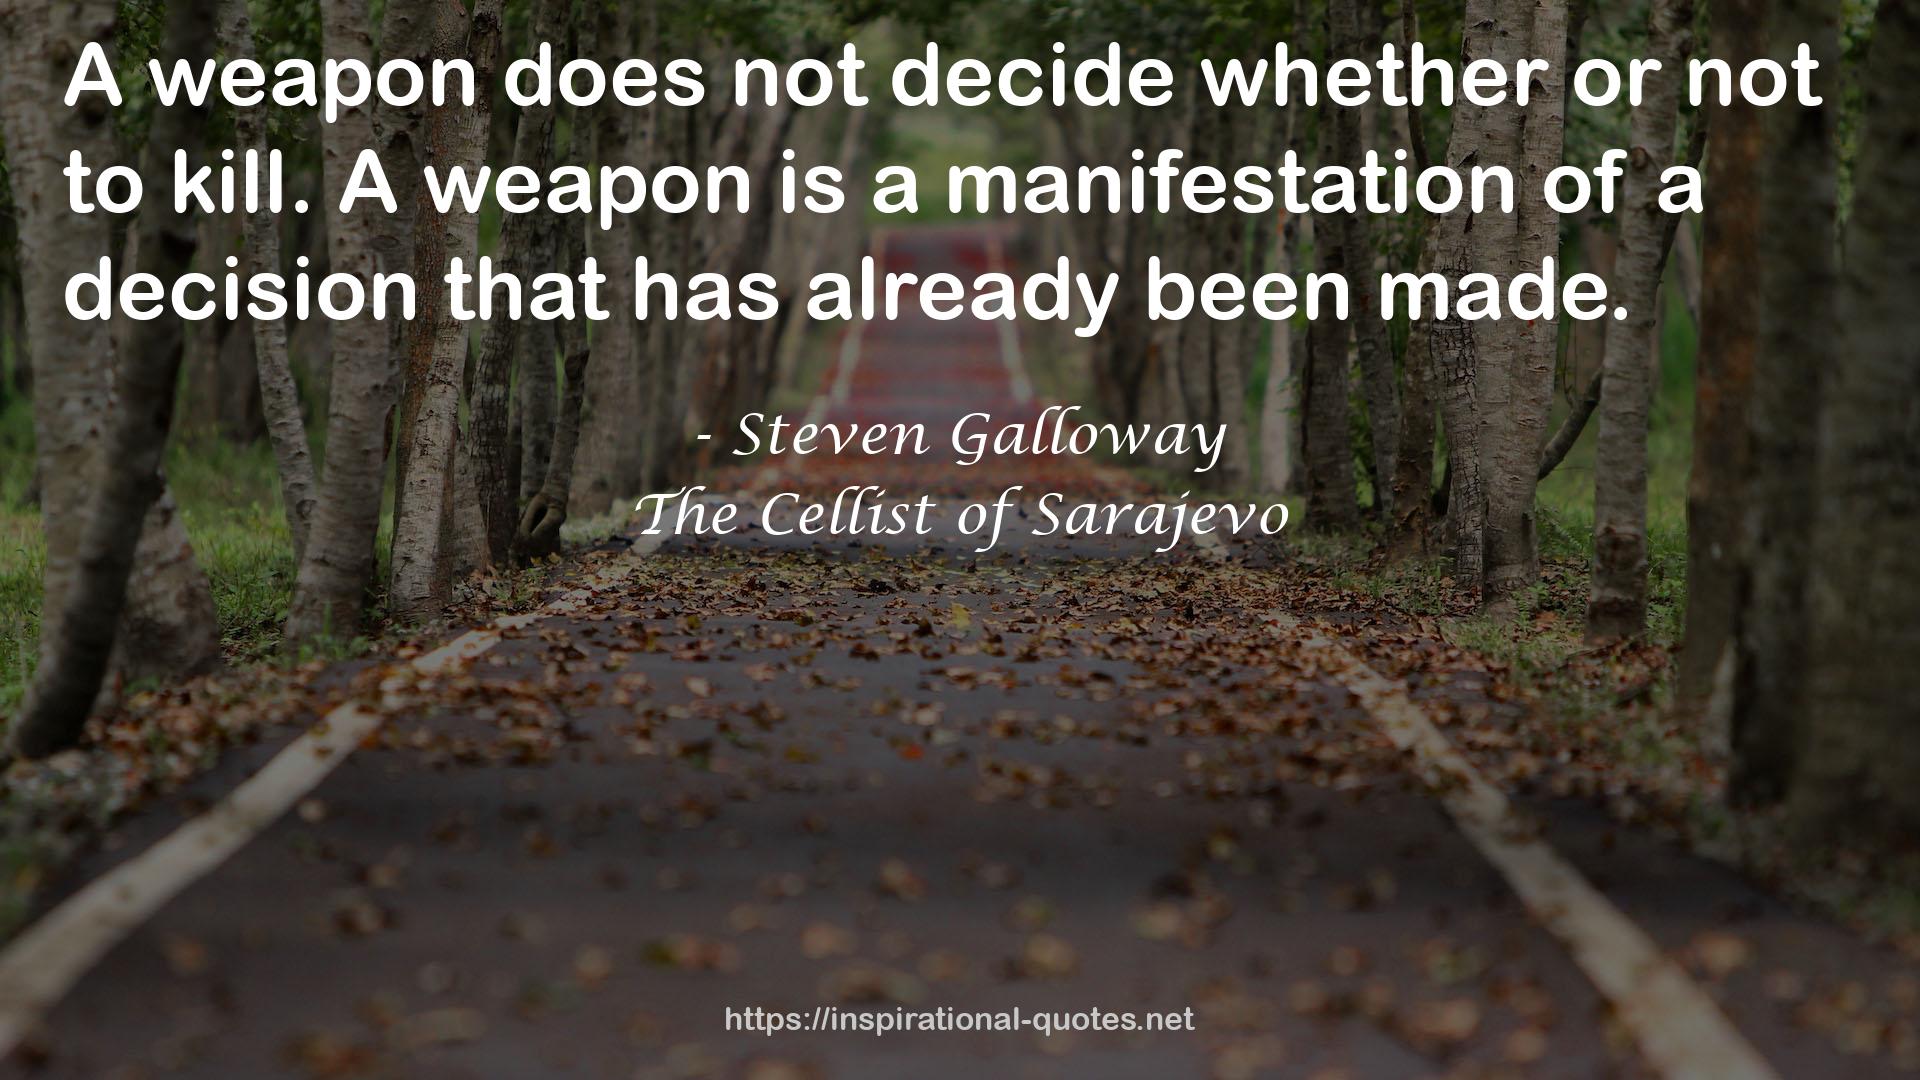 Steven Galloway QUOTES